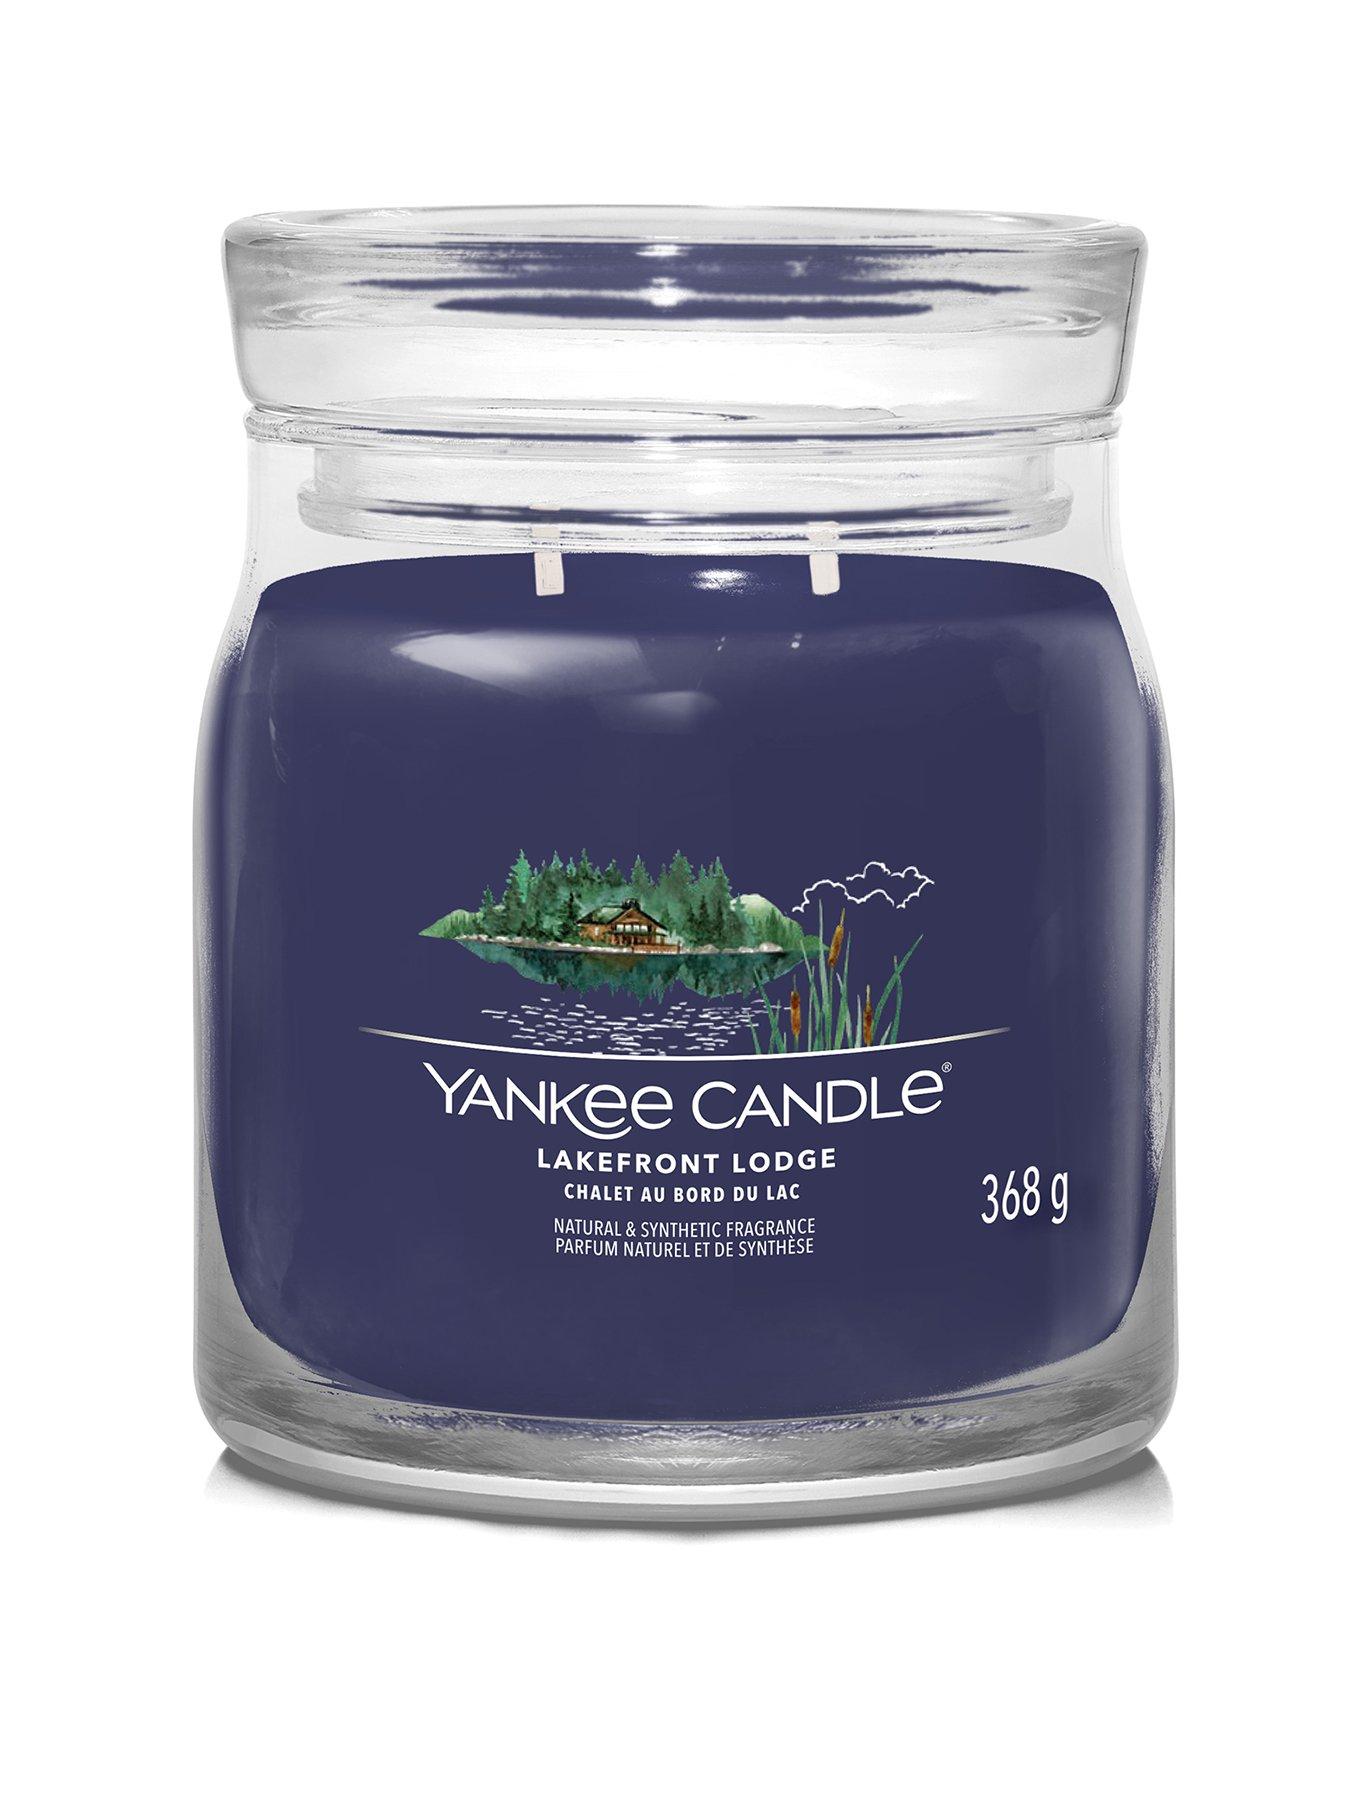 Yankee candle whole home air freshener… so far so good but we will see, Yankee Candle